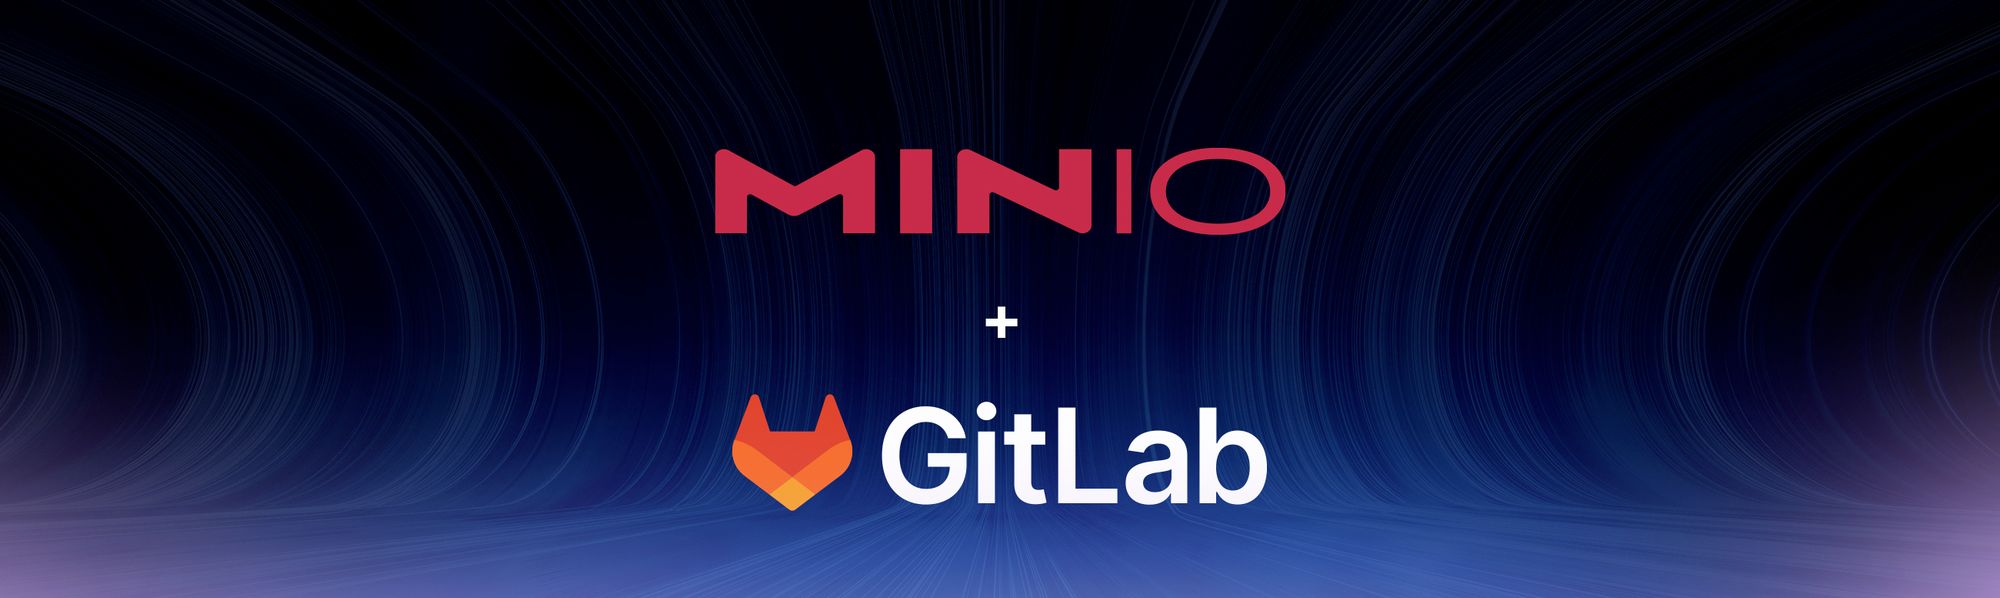 GitLab and MinIO for DevOps at Scale